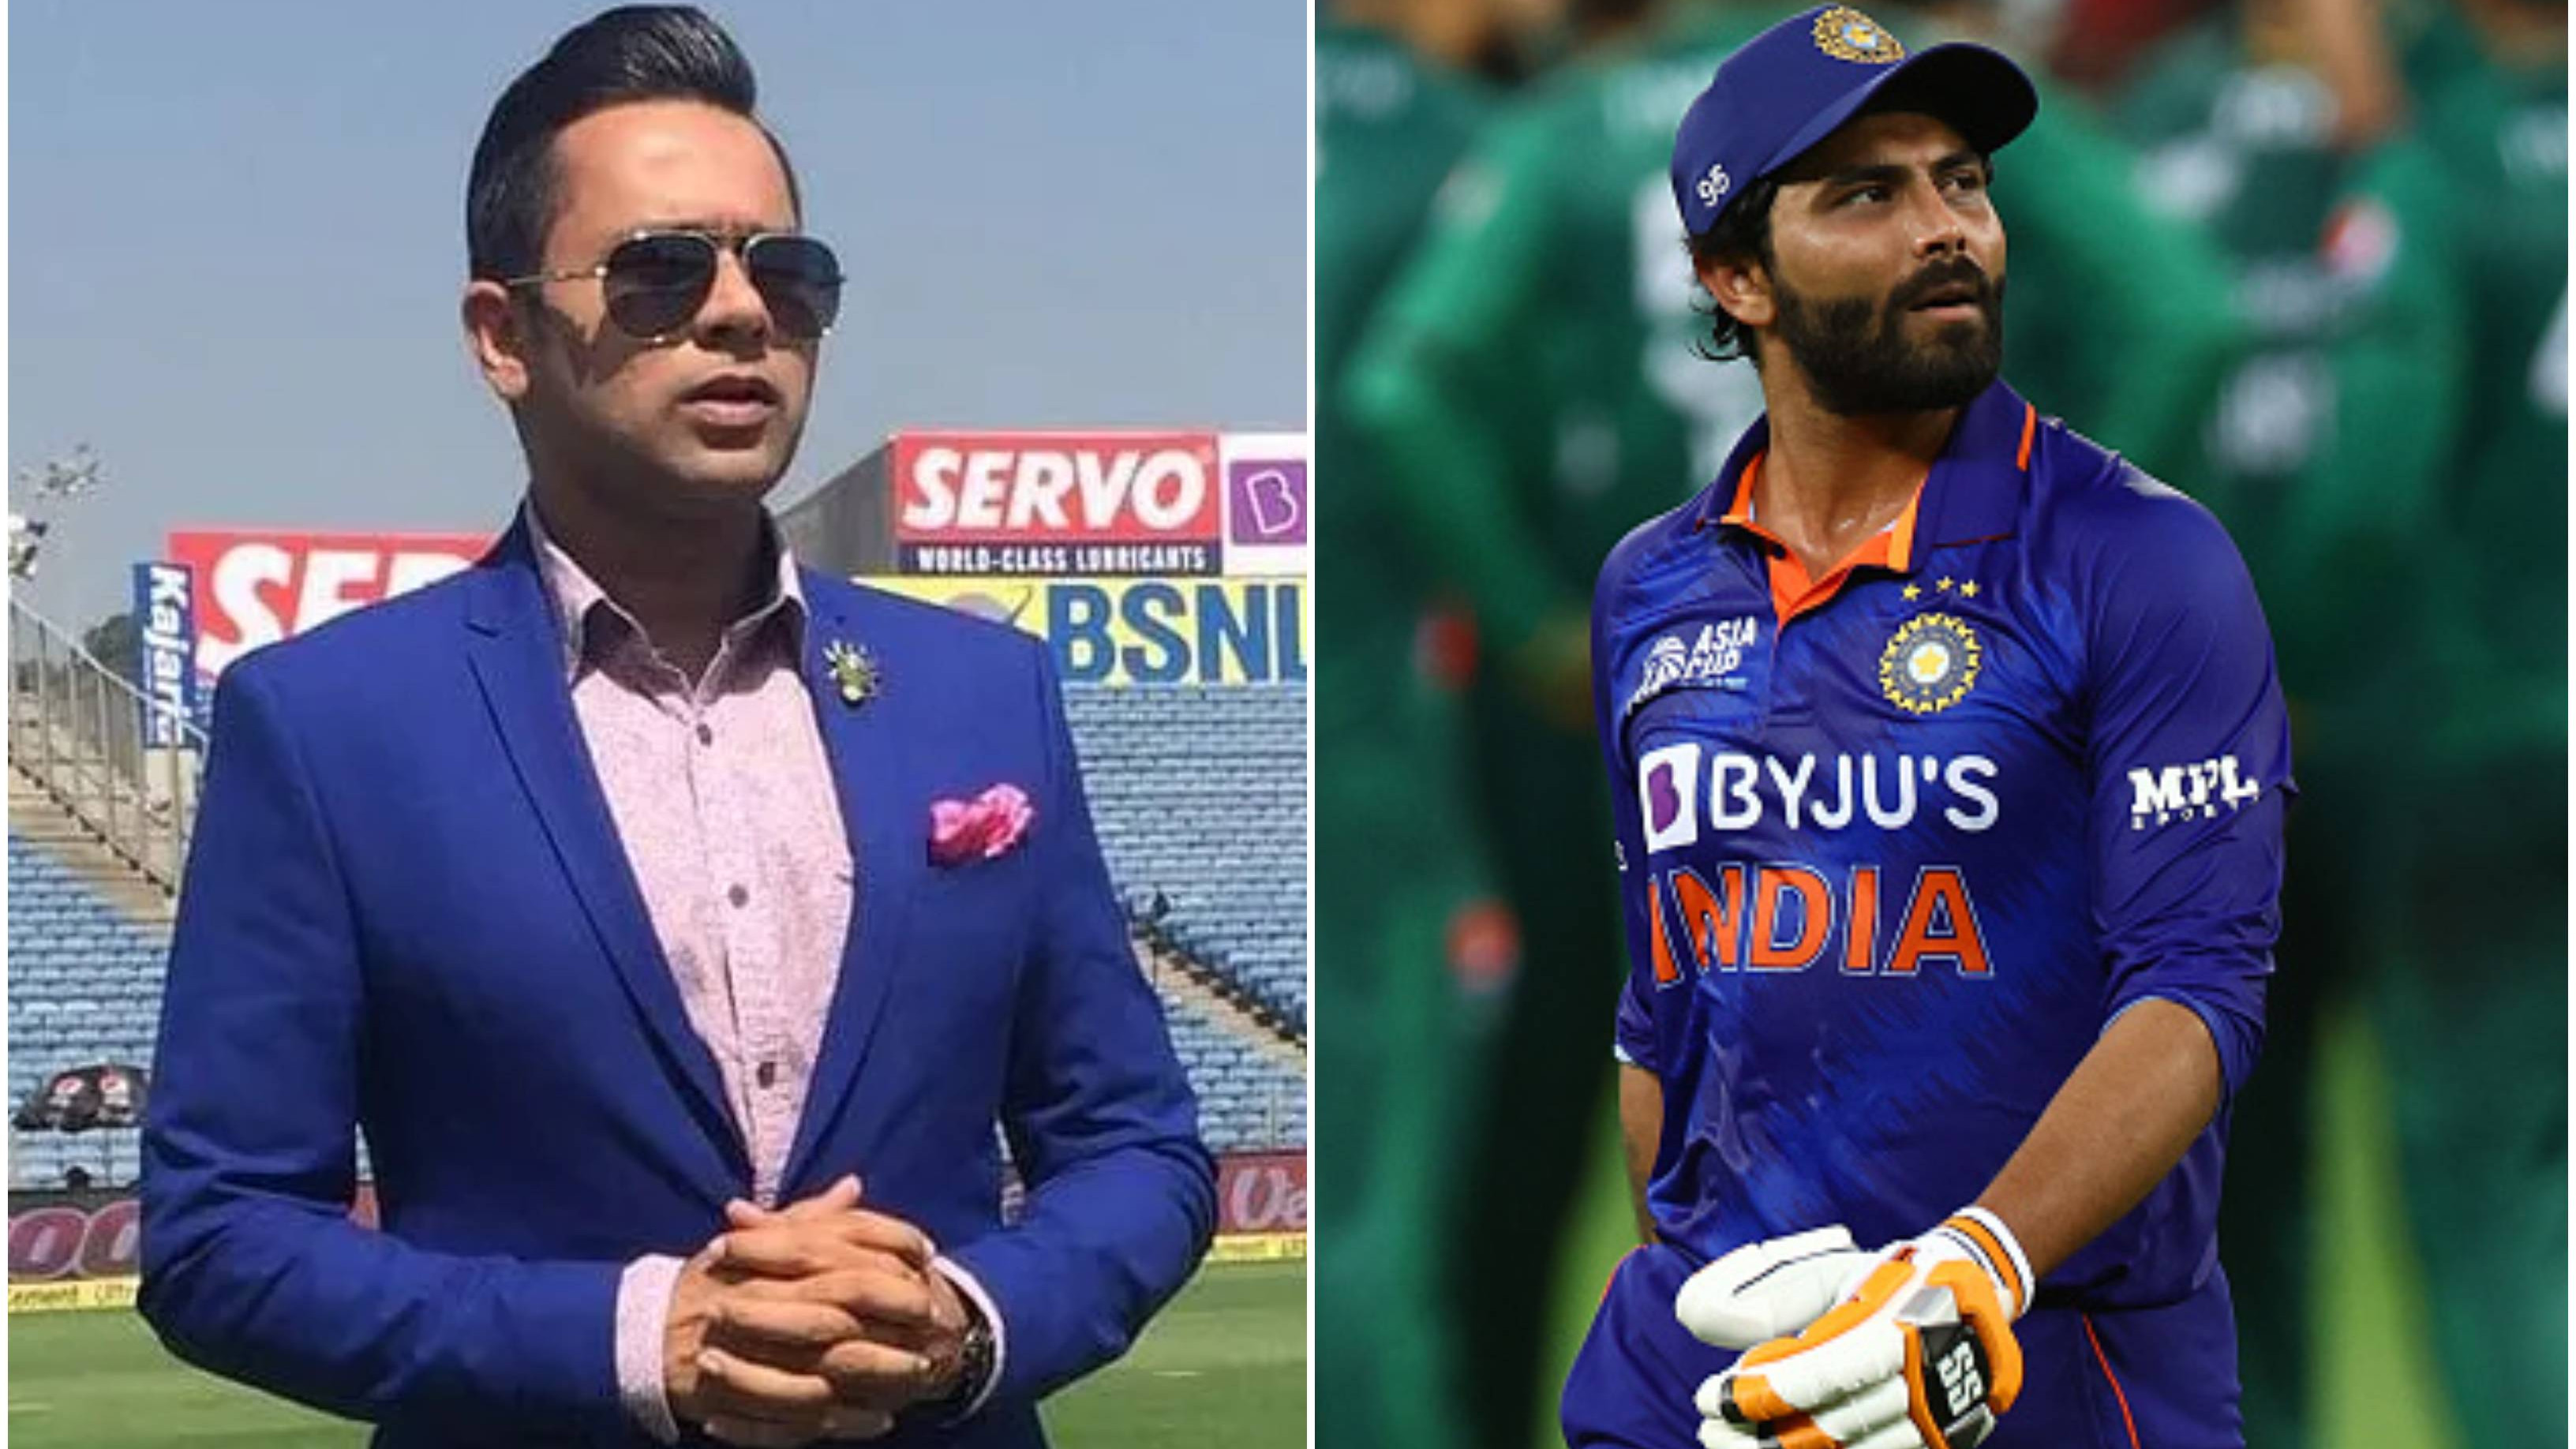 Asia Cup 2022: “Might see radical changes being made,” Aakash Chopra on injured Ravindra Jadeja’s absence in Team India